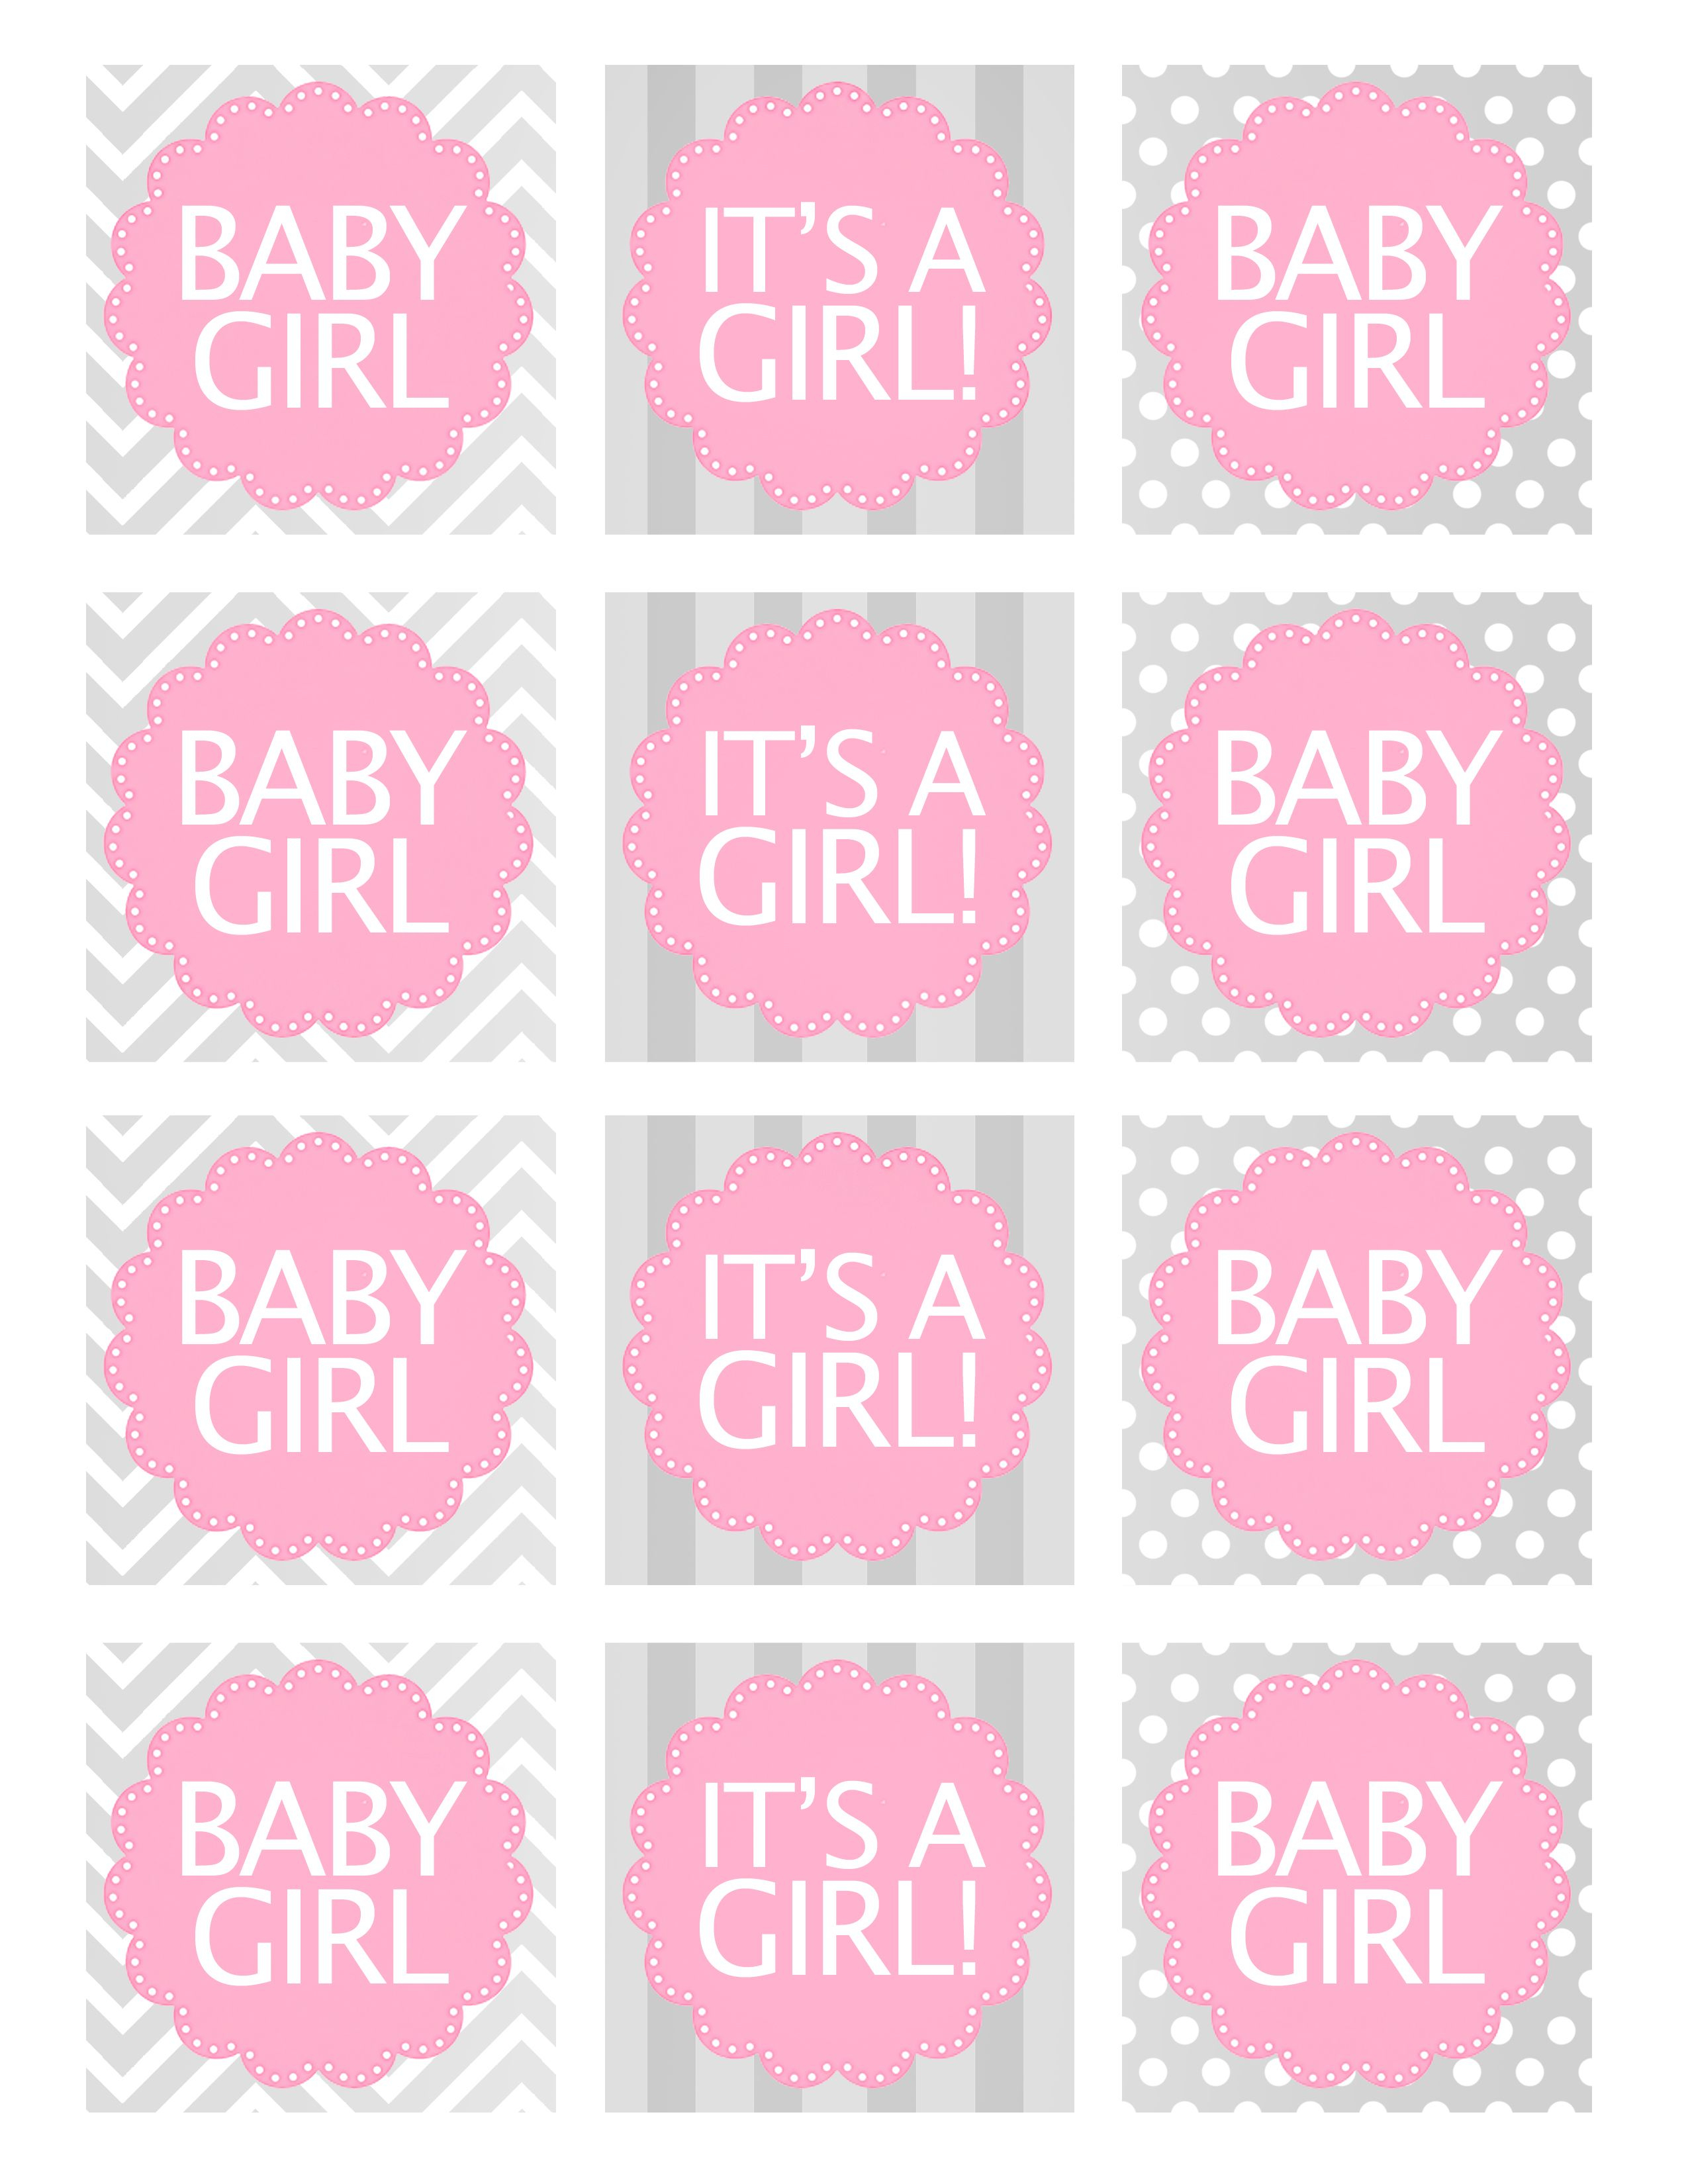 Baby Girl Shower Free Printables | Baby Shower Ideas | Pinterest - Free Printable Baby Shower Favor Tags